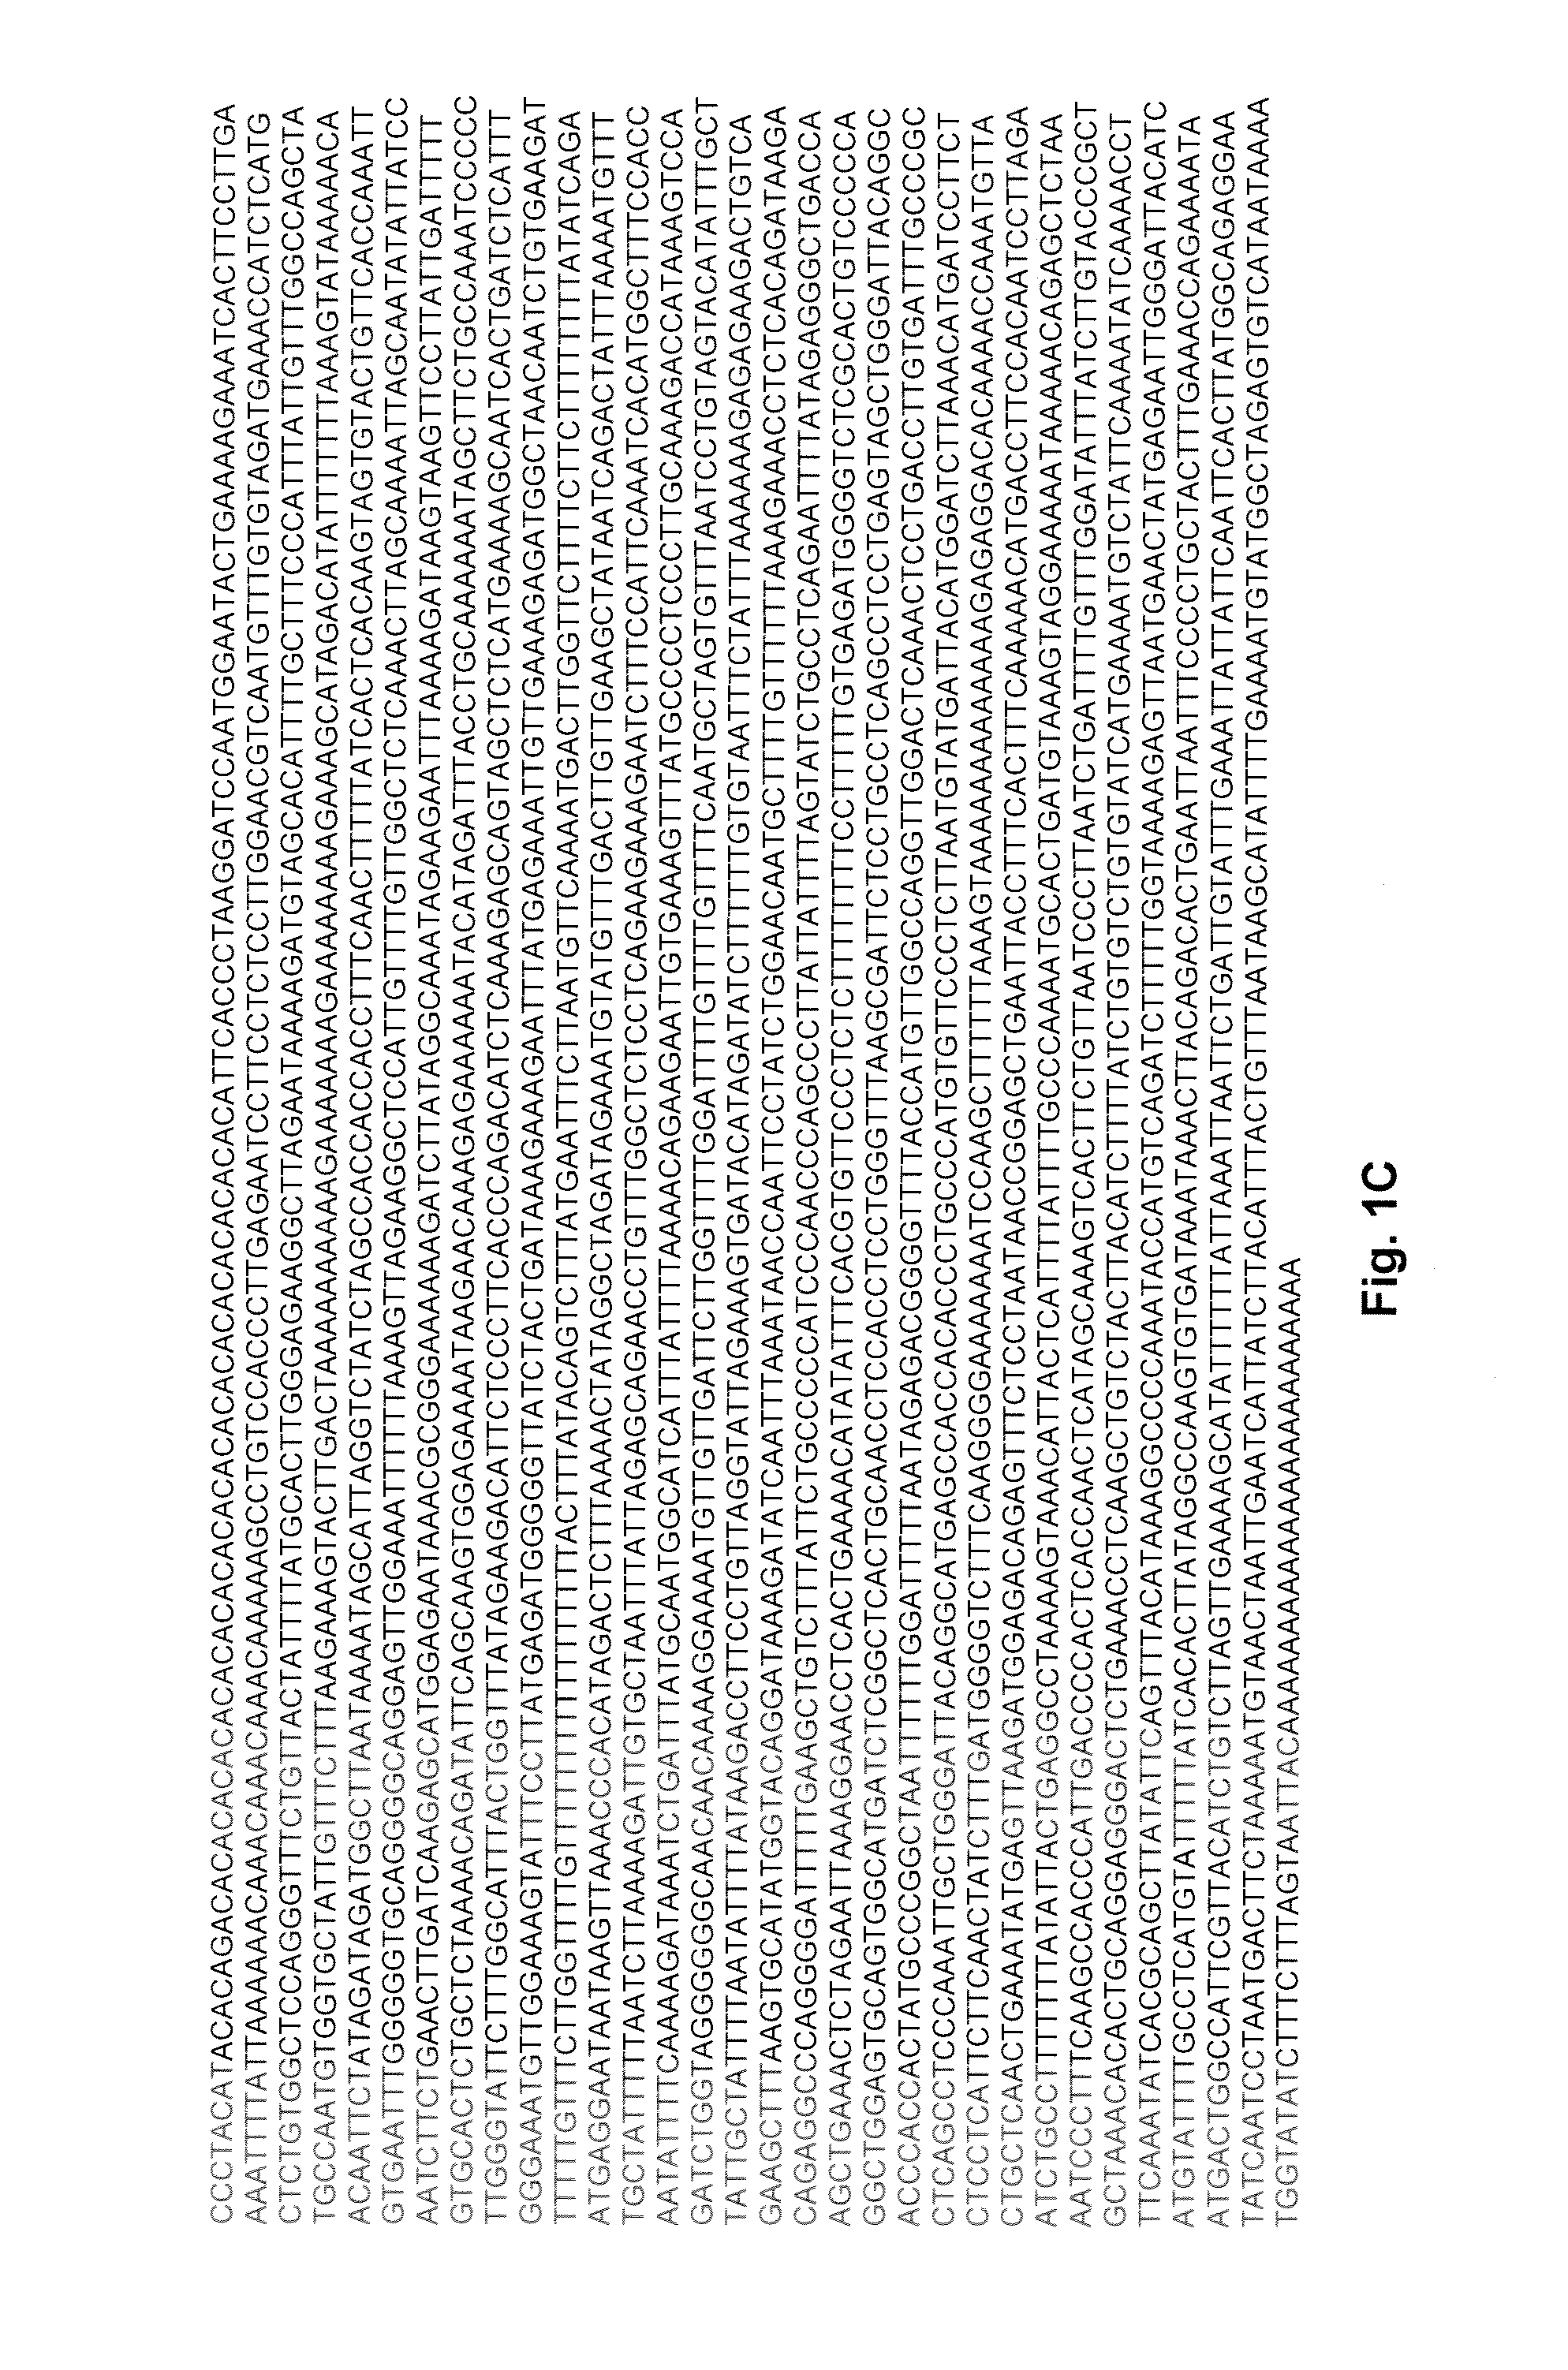 Methods of screening for compounds for treating muscular dystrophy using mIGF1 mRNA translation regulation